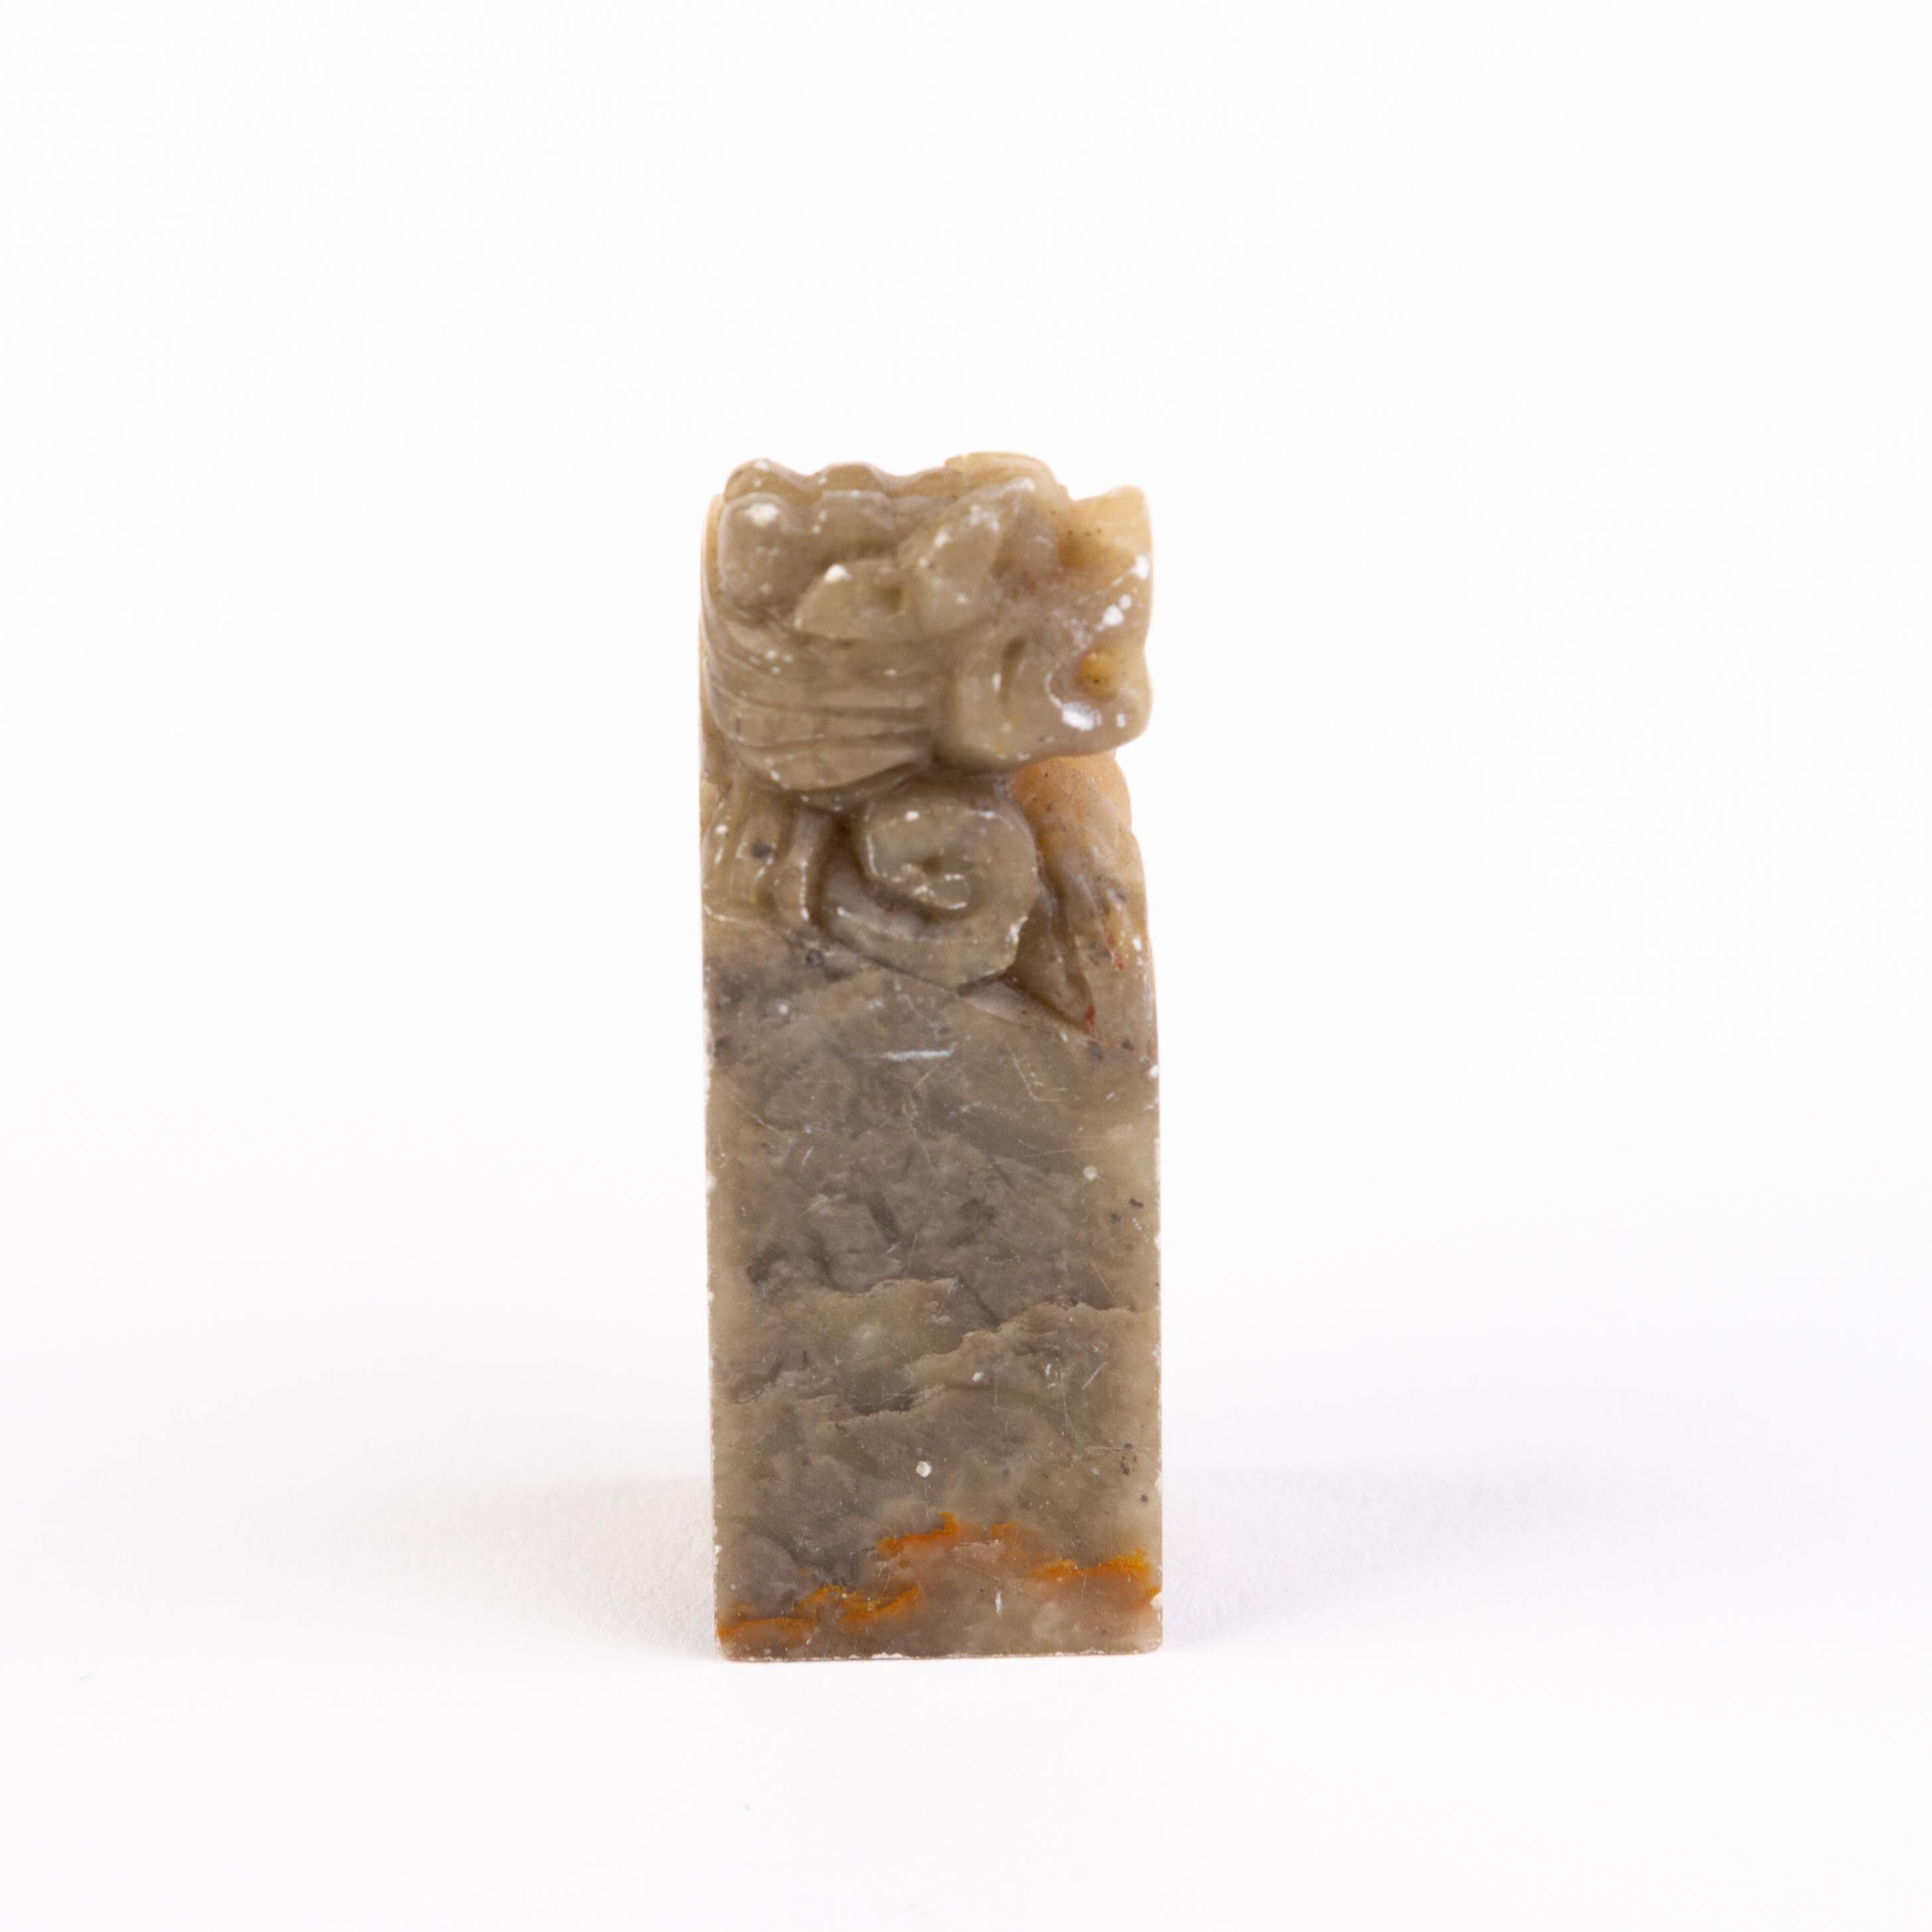 In good condition
From a private collection
Free international shipping
Chinese Carved Soapstone Dragon Seal 